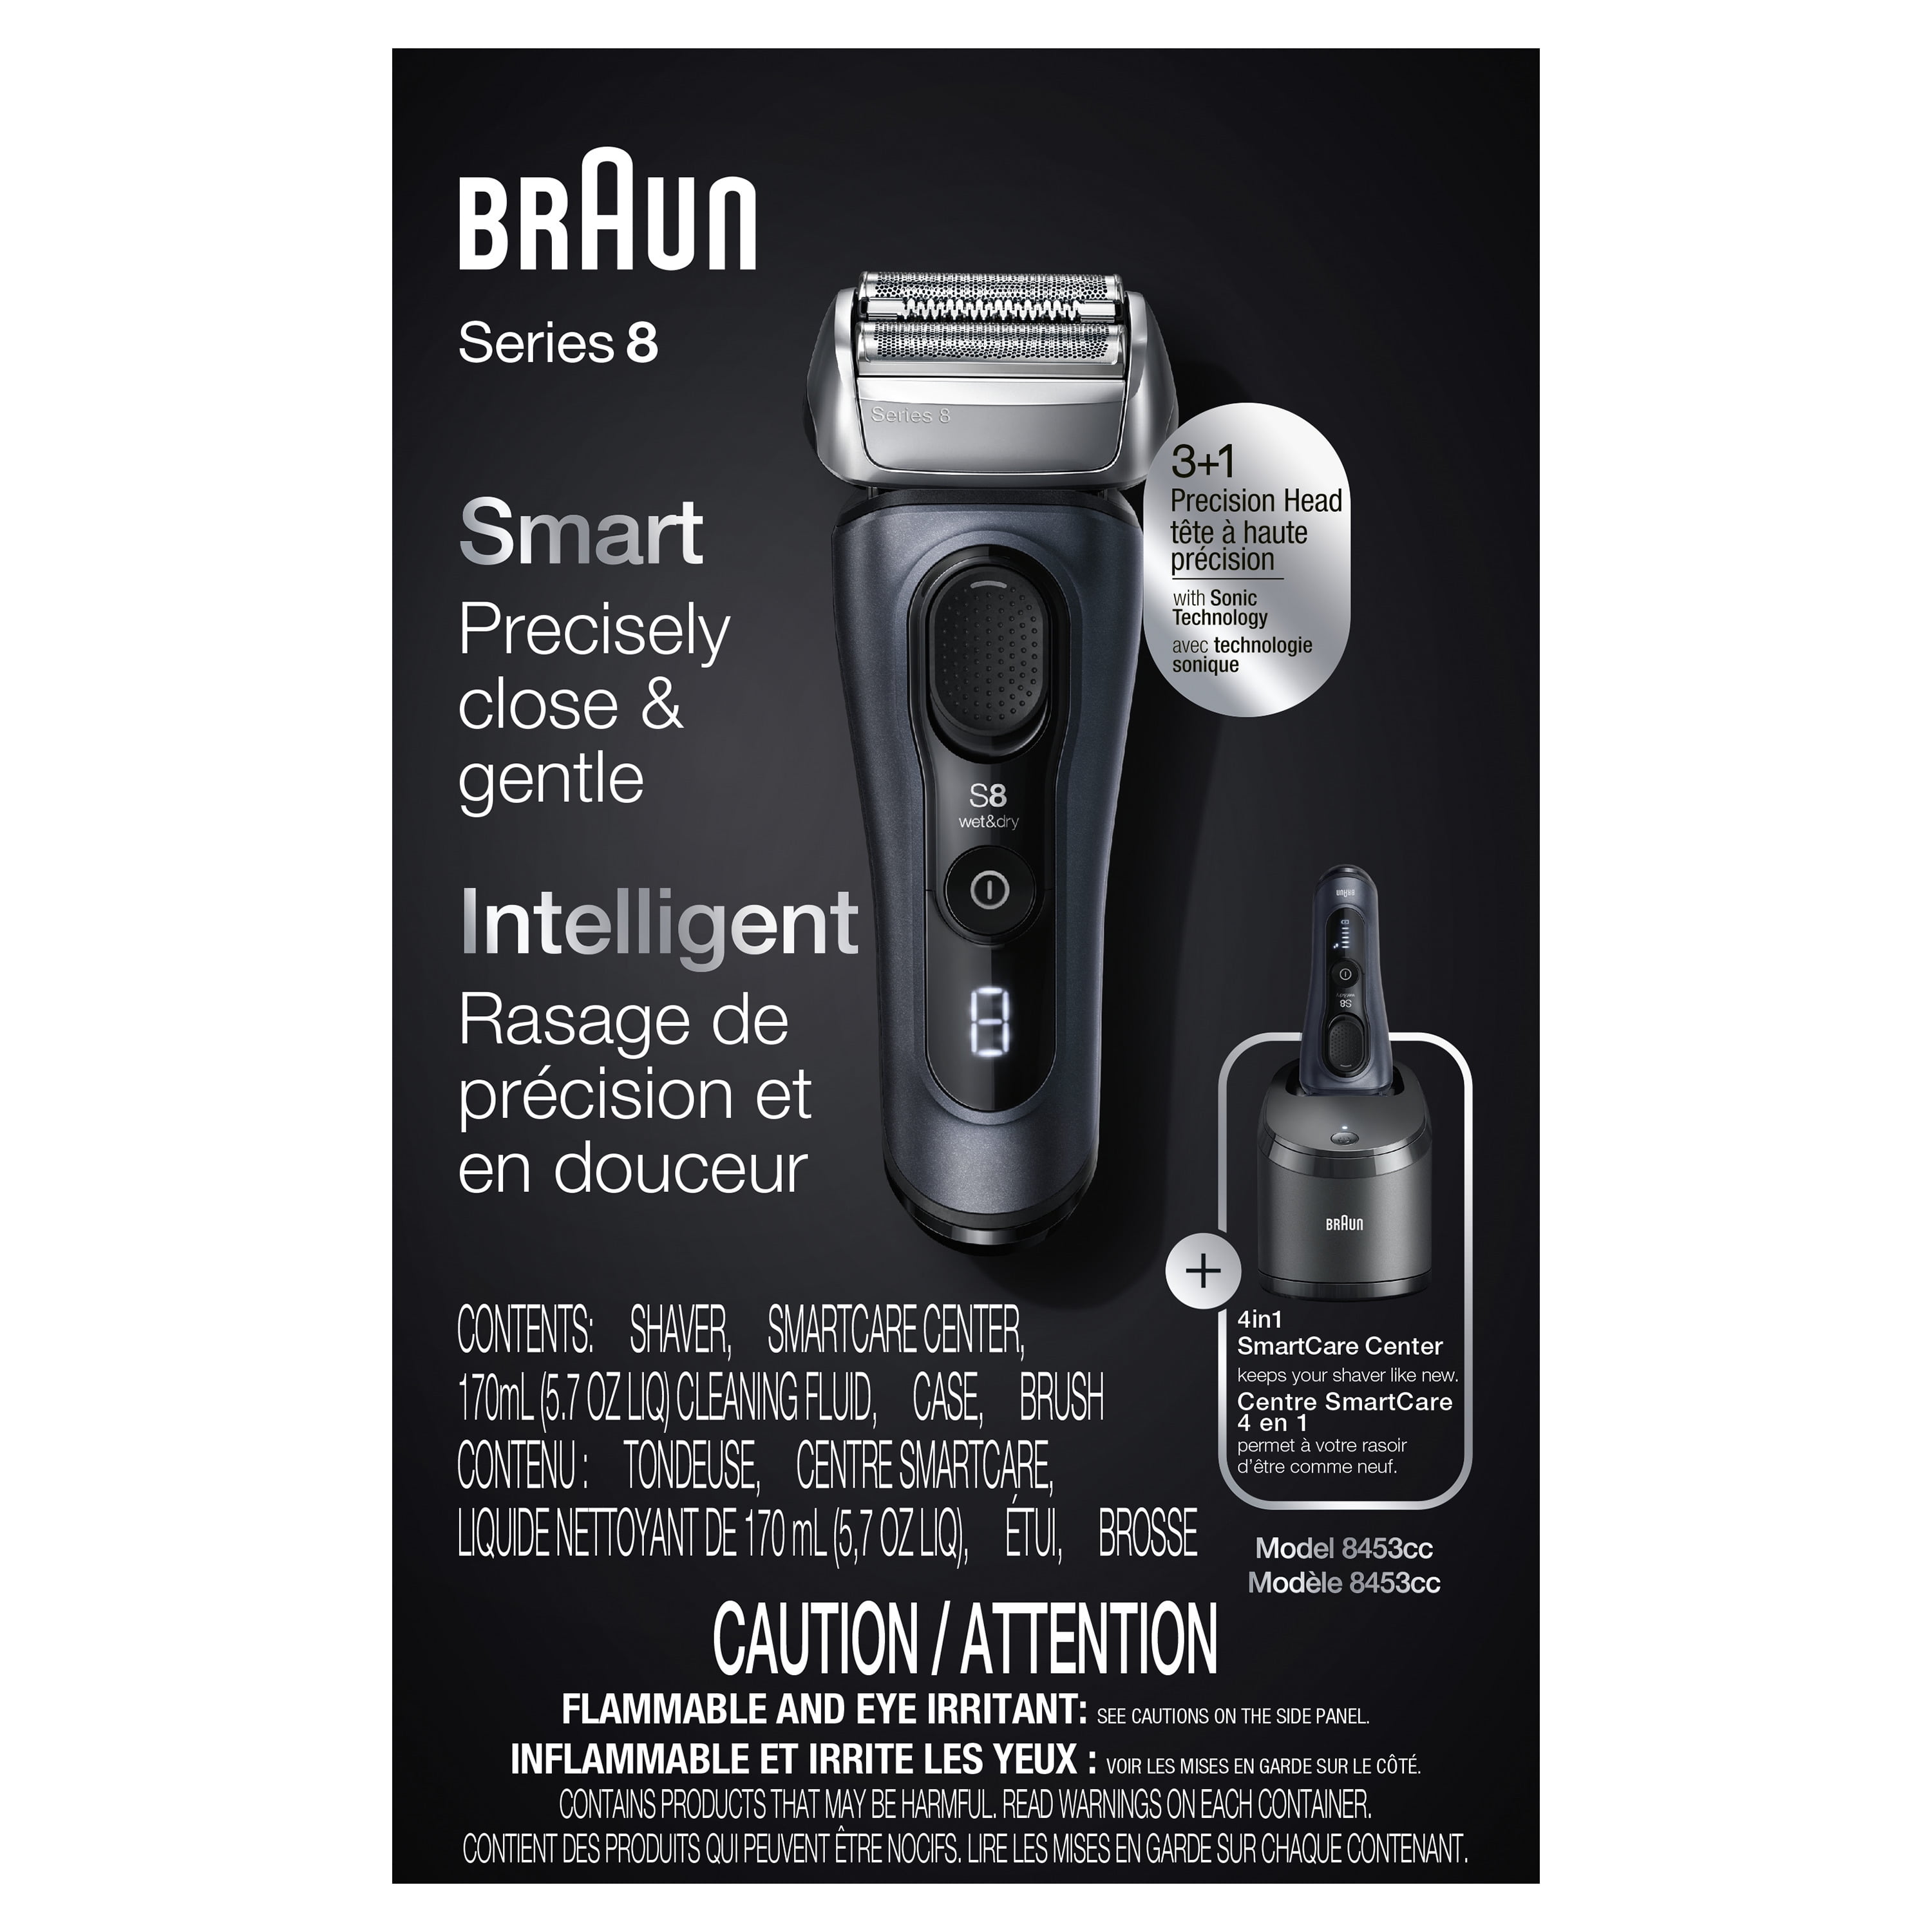 Braun Series 8 8453cc Electric Shaver for Men, 3+1 Head with Precision ...